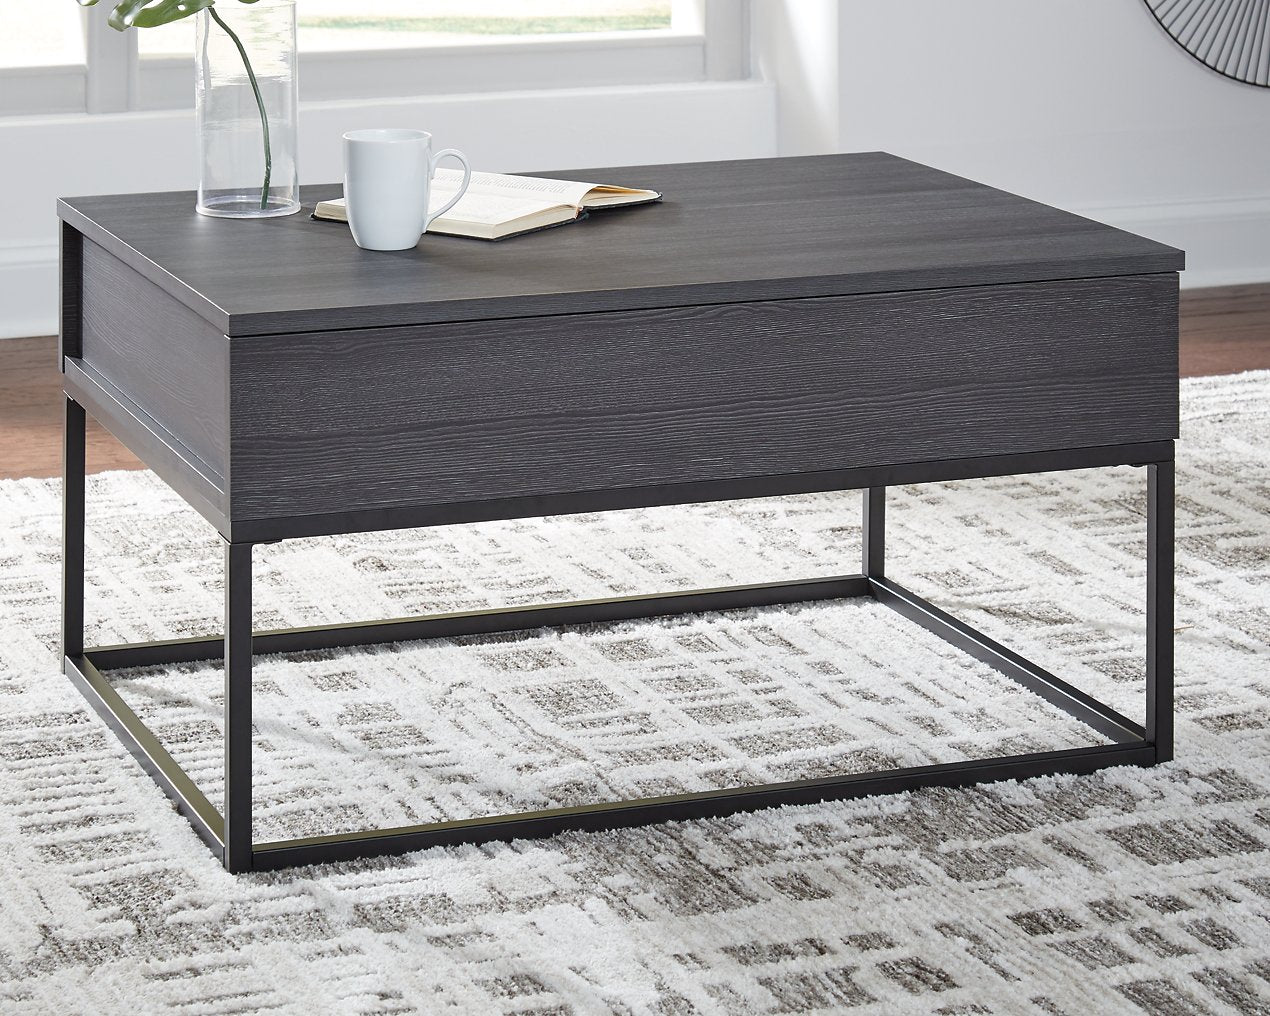 Yarlow Lift-Top Coffee Table image